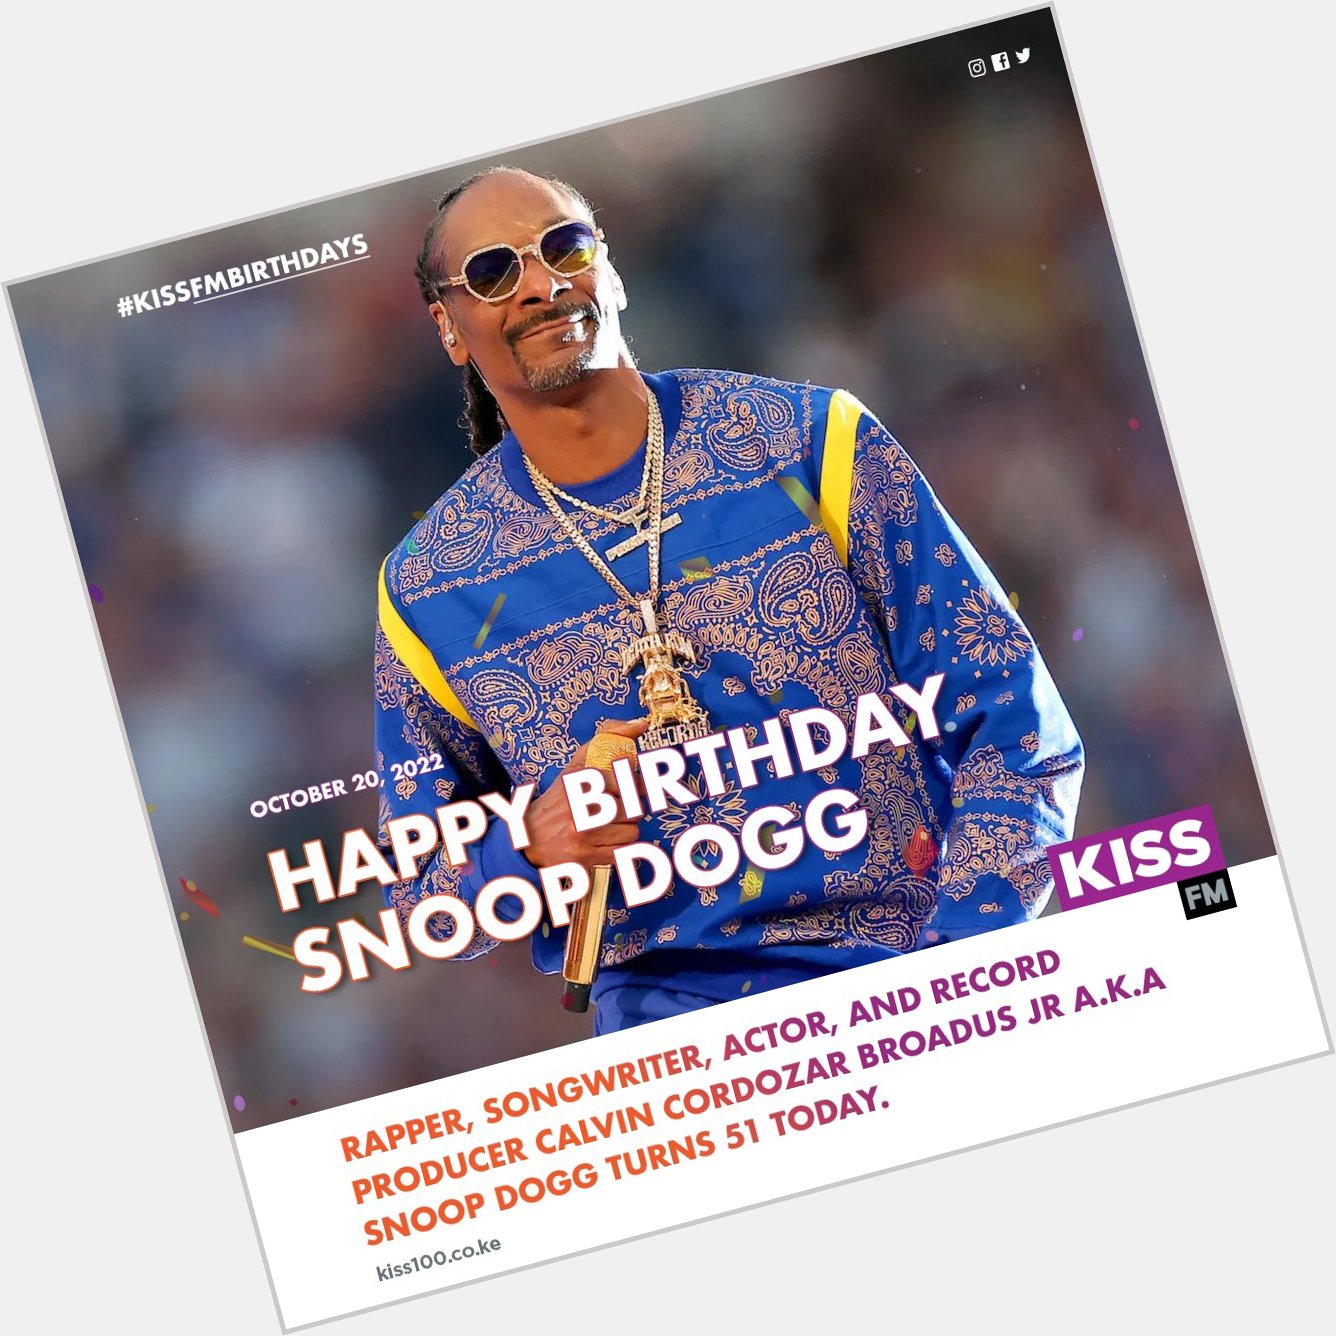 Snoop Dogg turns 51 today. Happy birthday to a legend.   